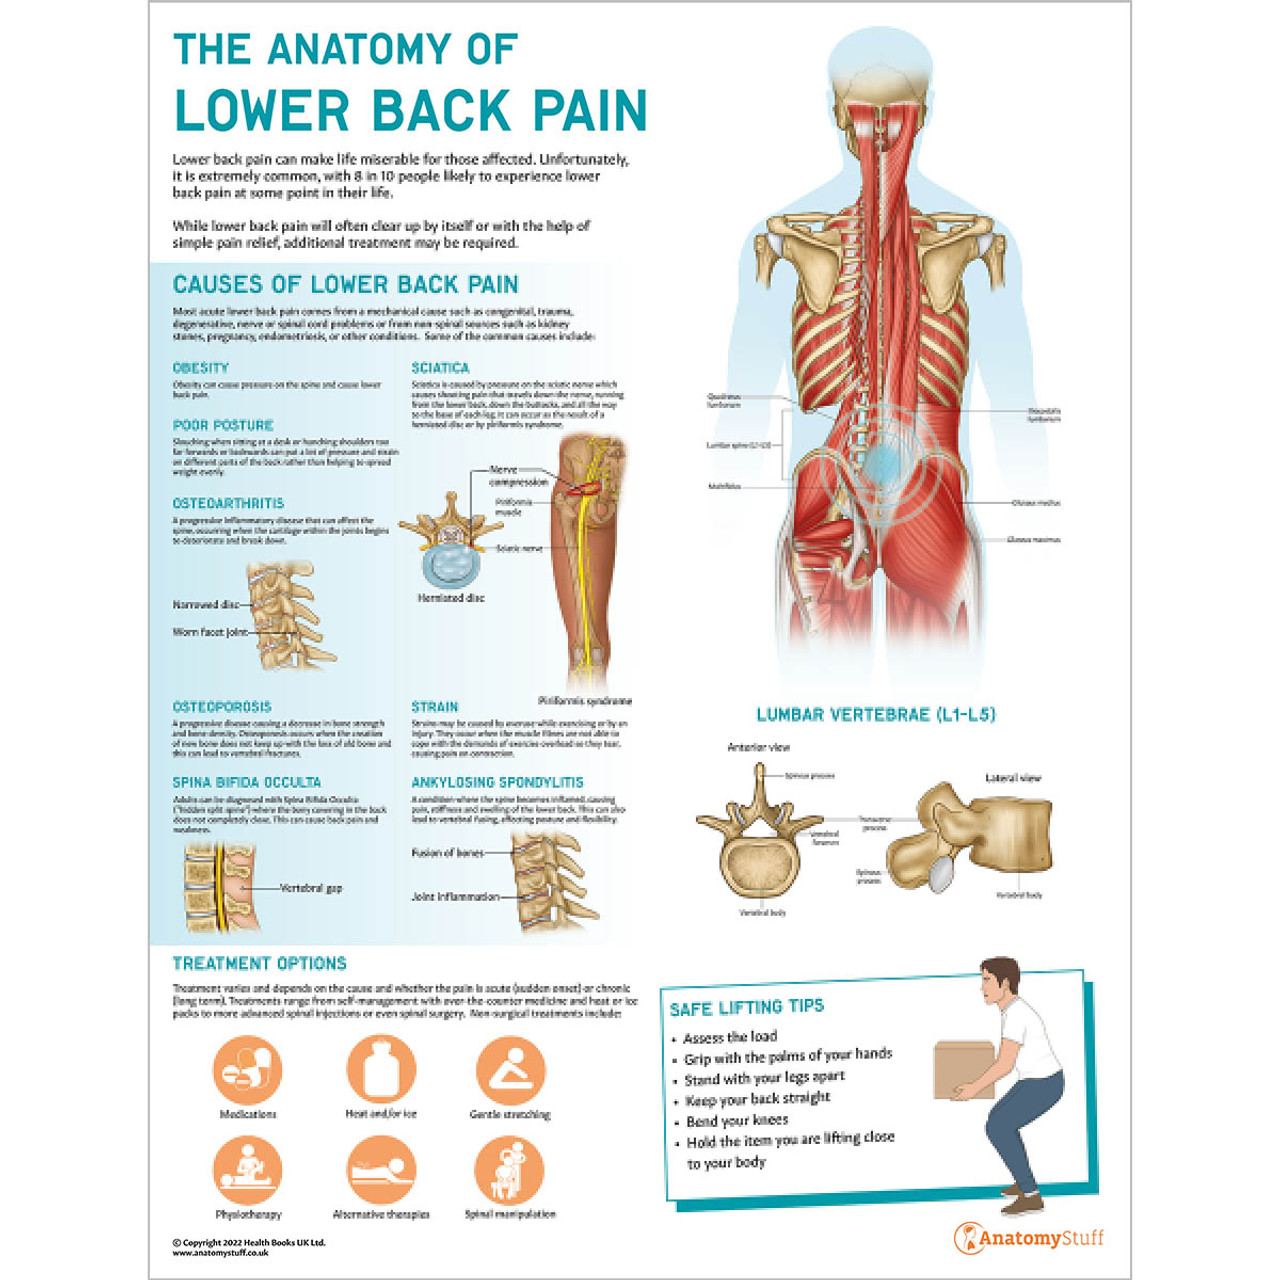 The Anatomy Of Lower Back Pain Poster Chart  14775.1671554711 ?c=1